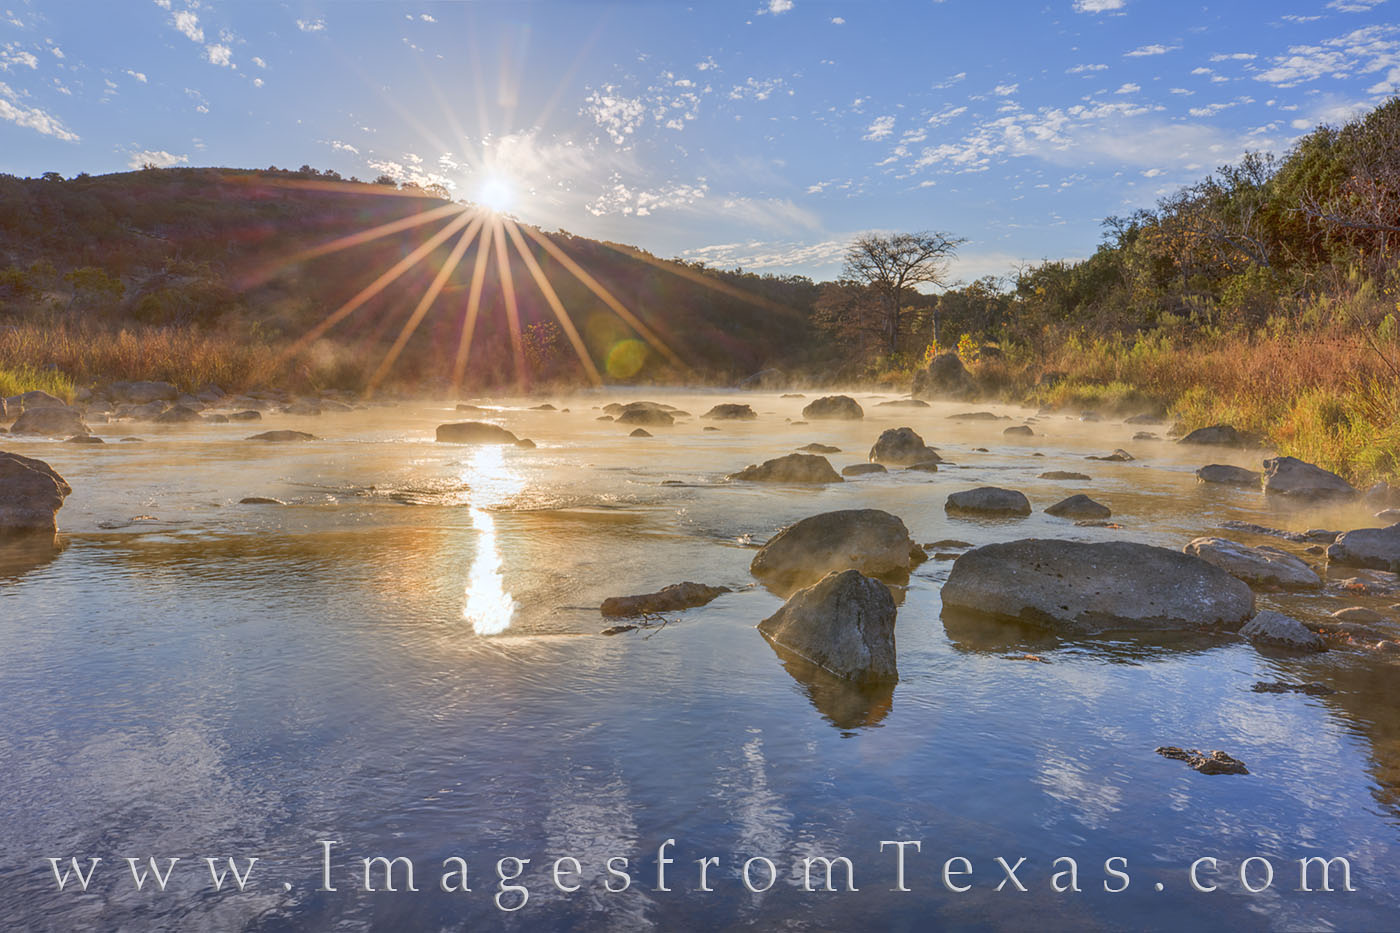 Shooting straight into the sun, this image shows the moments after sunrise looking downstream on the Pedernales River. It was...